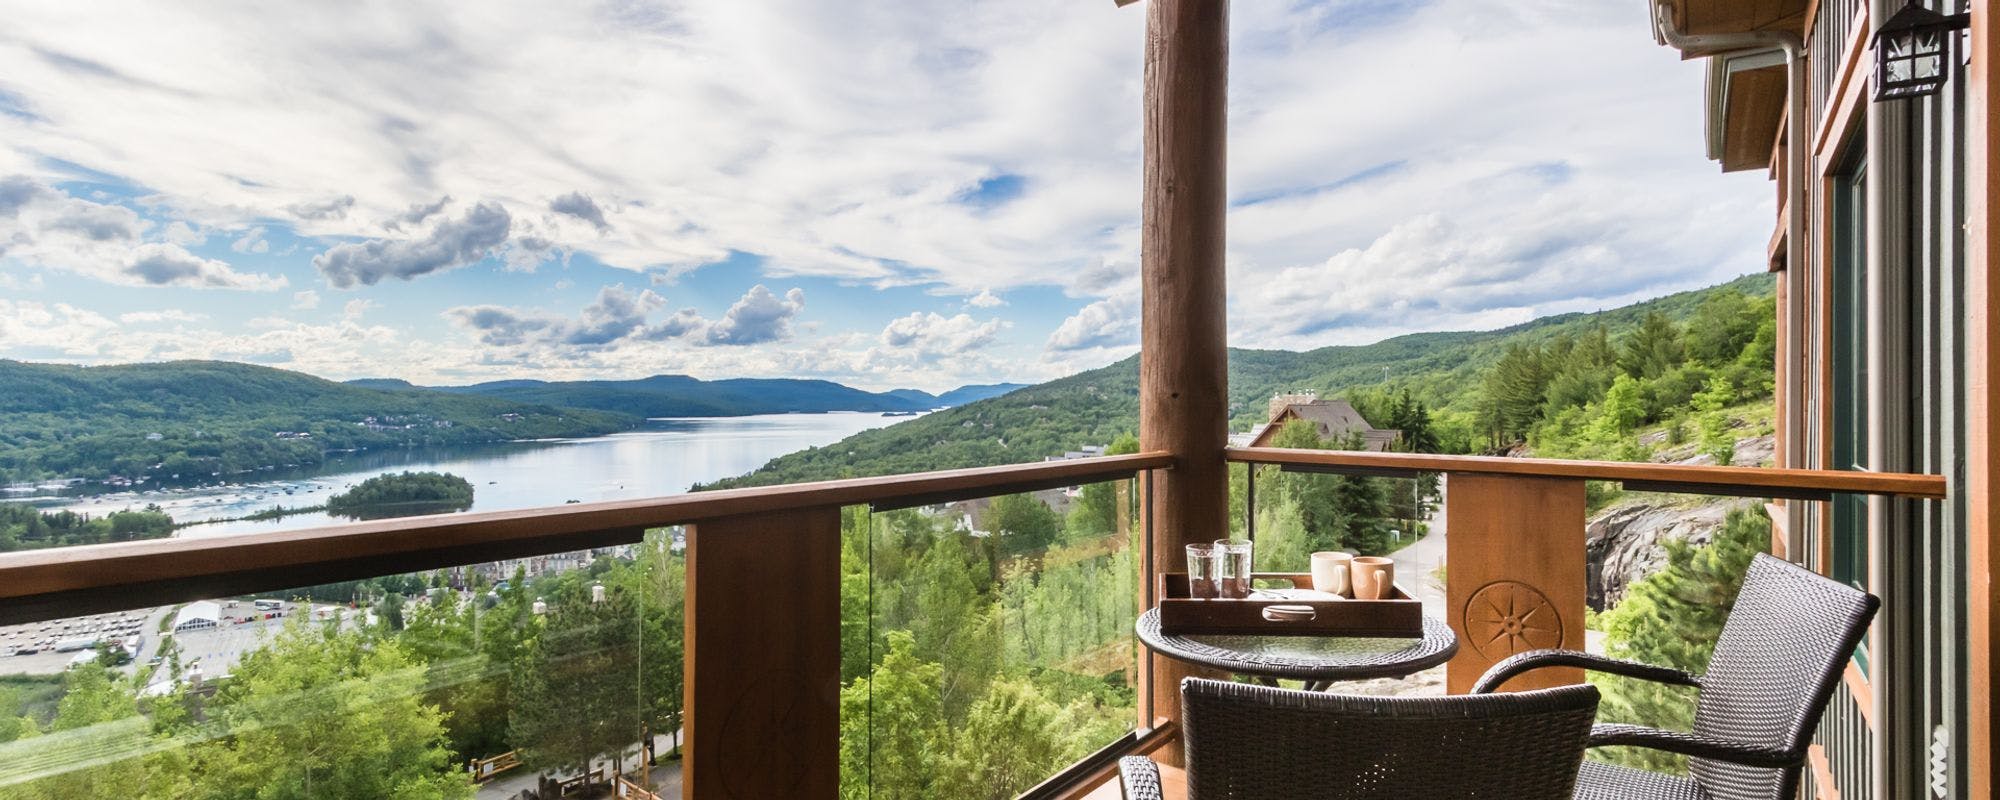 Balcony view from a Mont-Tremblant vacation rental